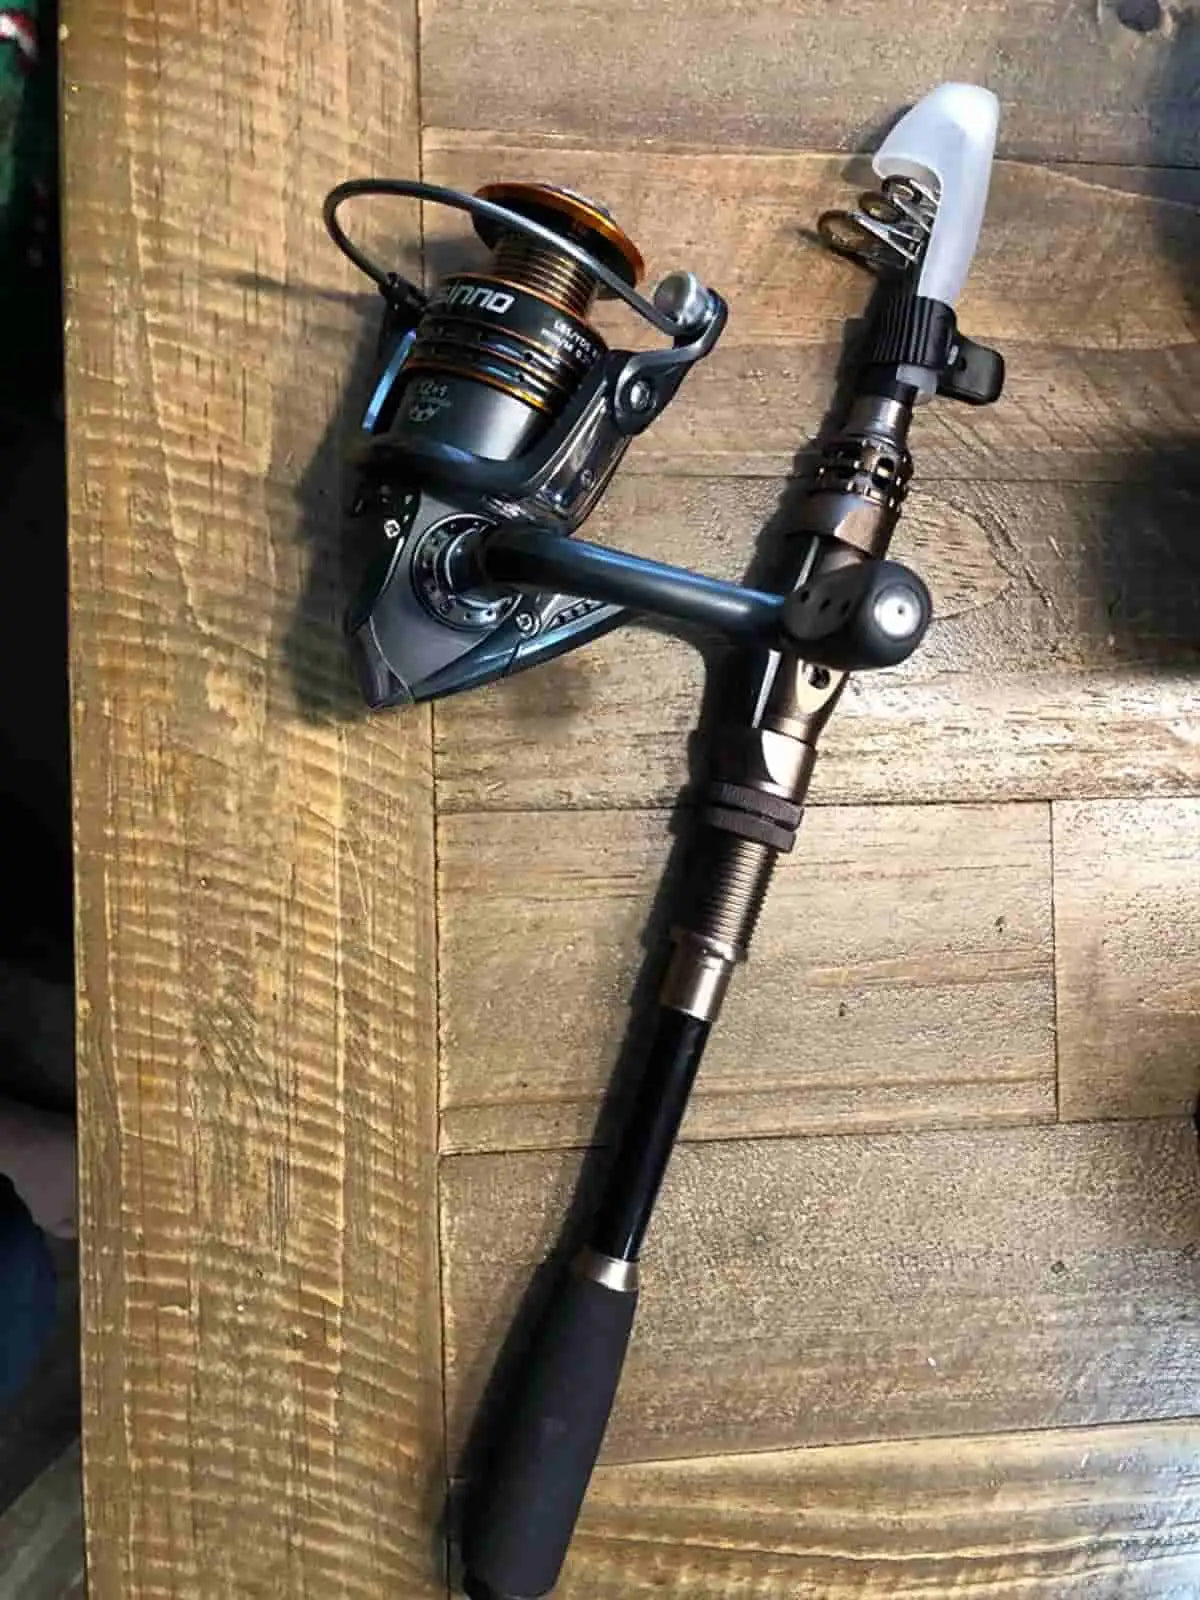 Telescoping Fishing Poles: What to Look for When Shopping